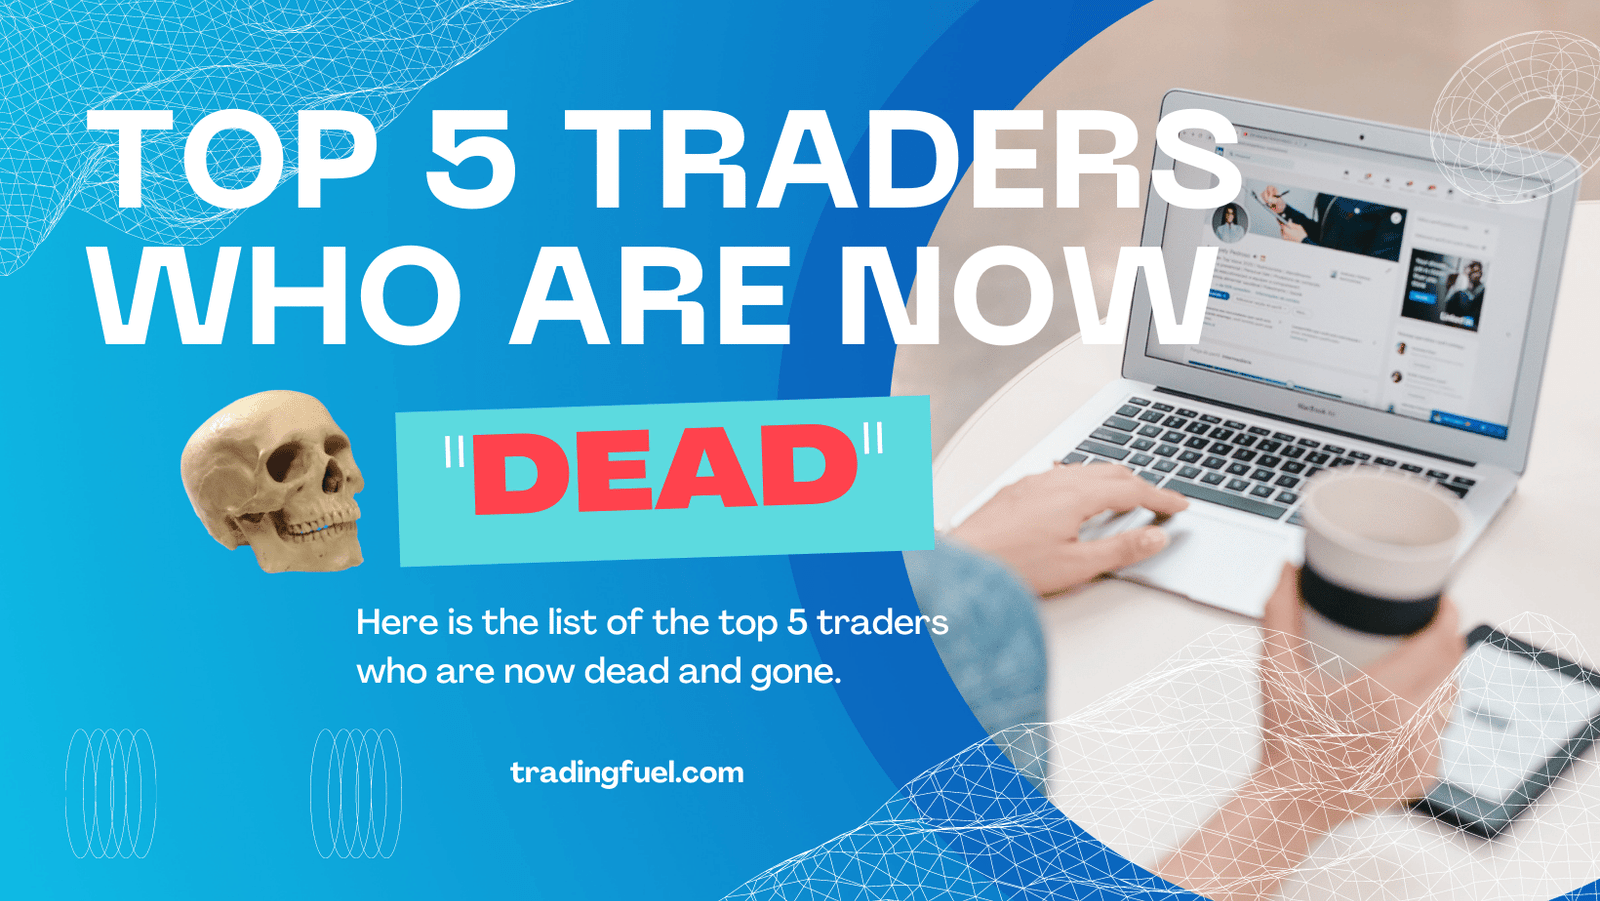 Top 5 Traders who are now “DEAD”